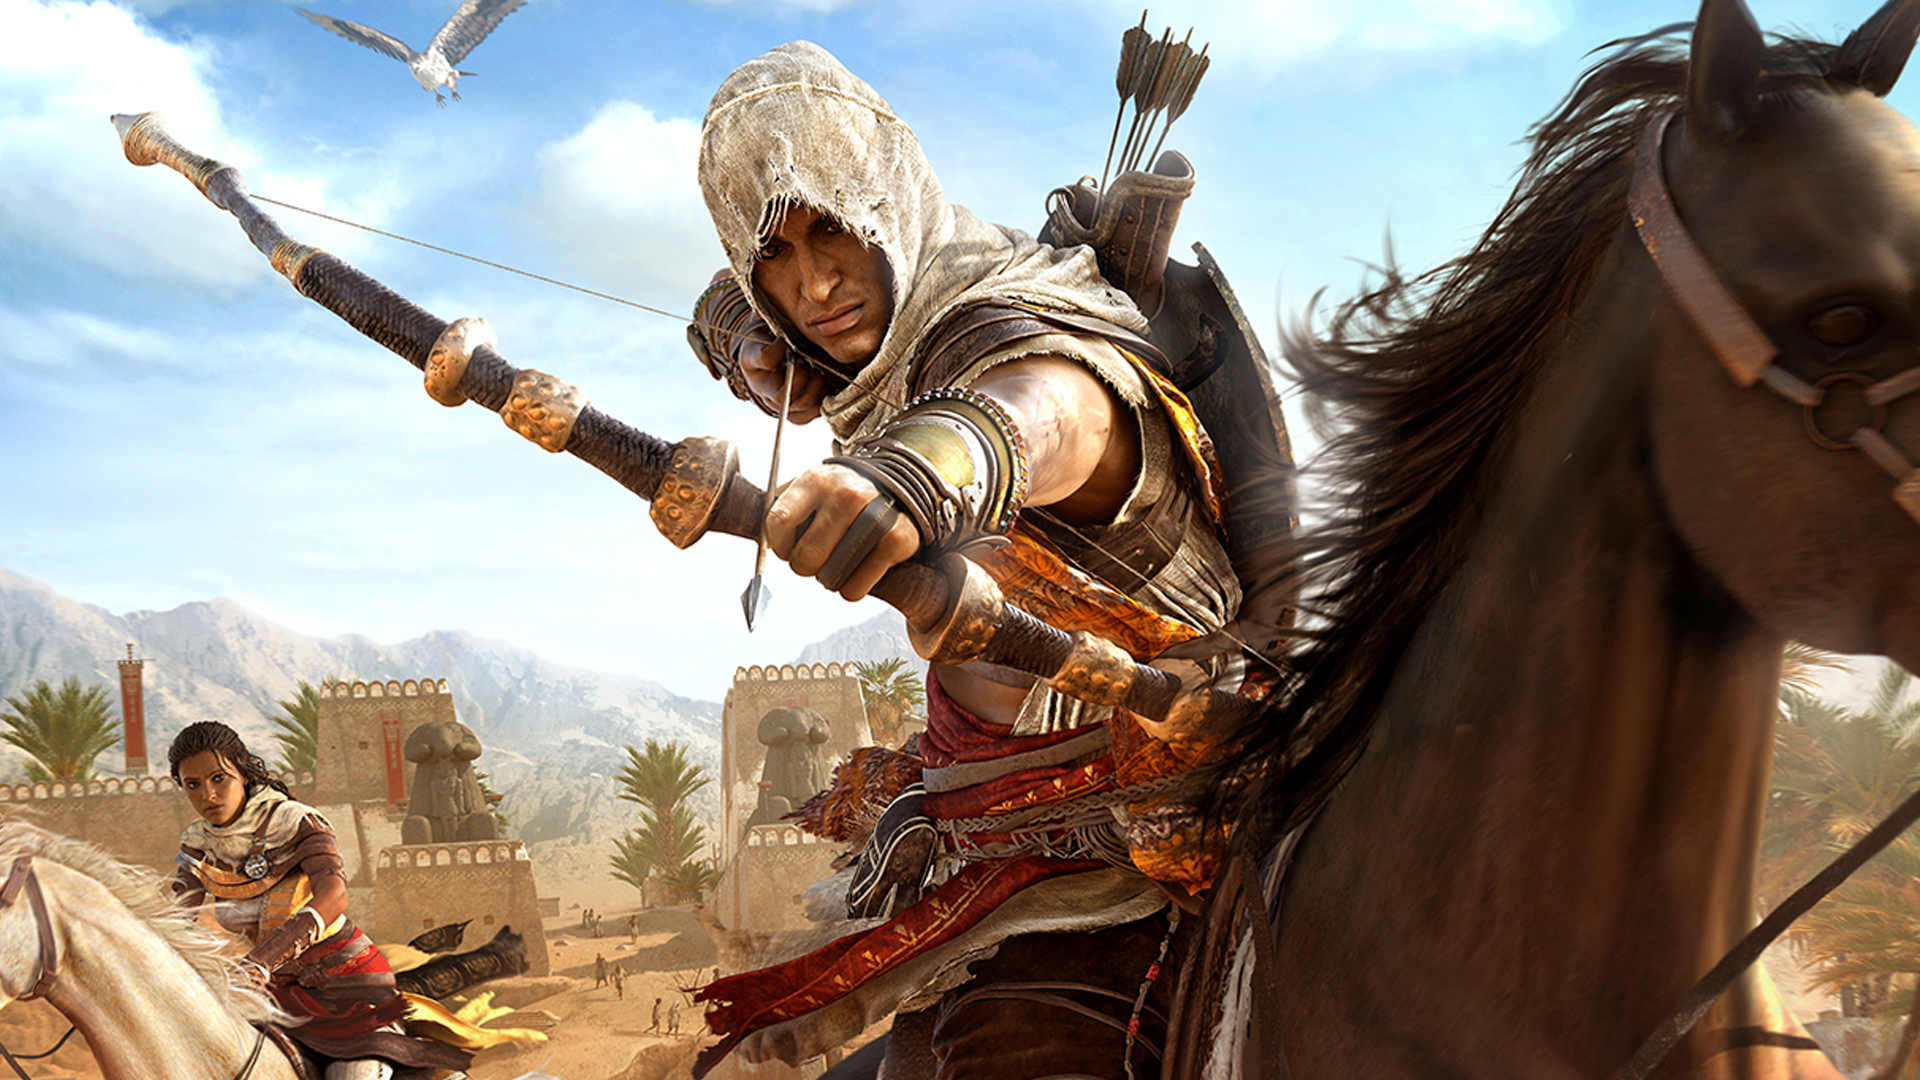 Game Pass April games – Assassin's Creed Origins coming soon